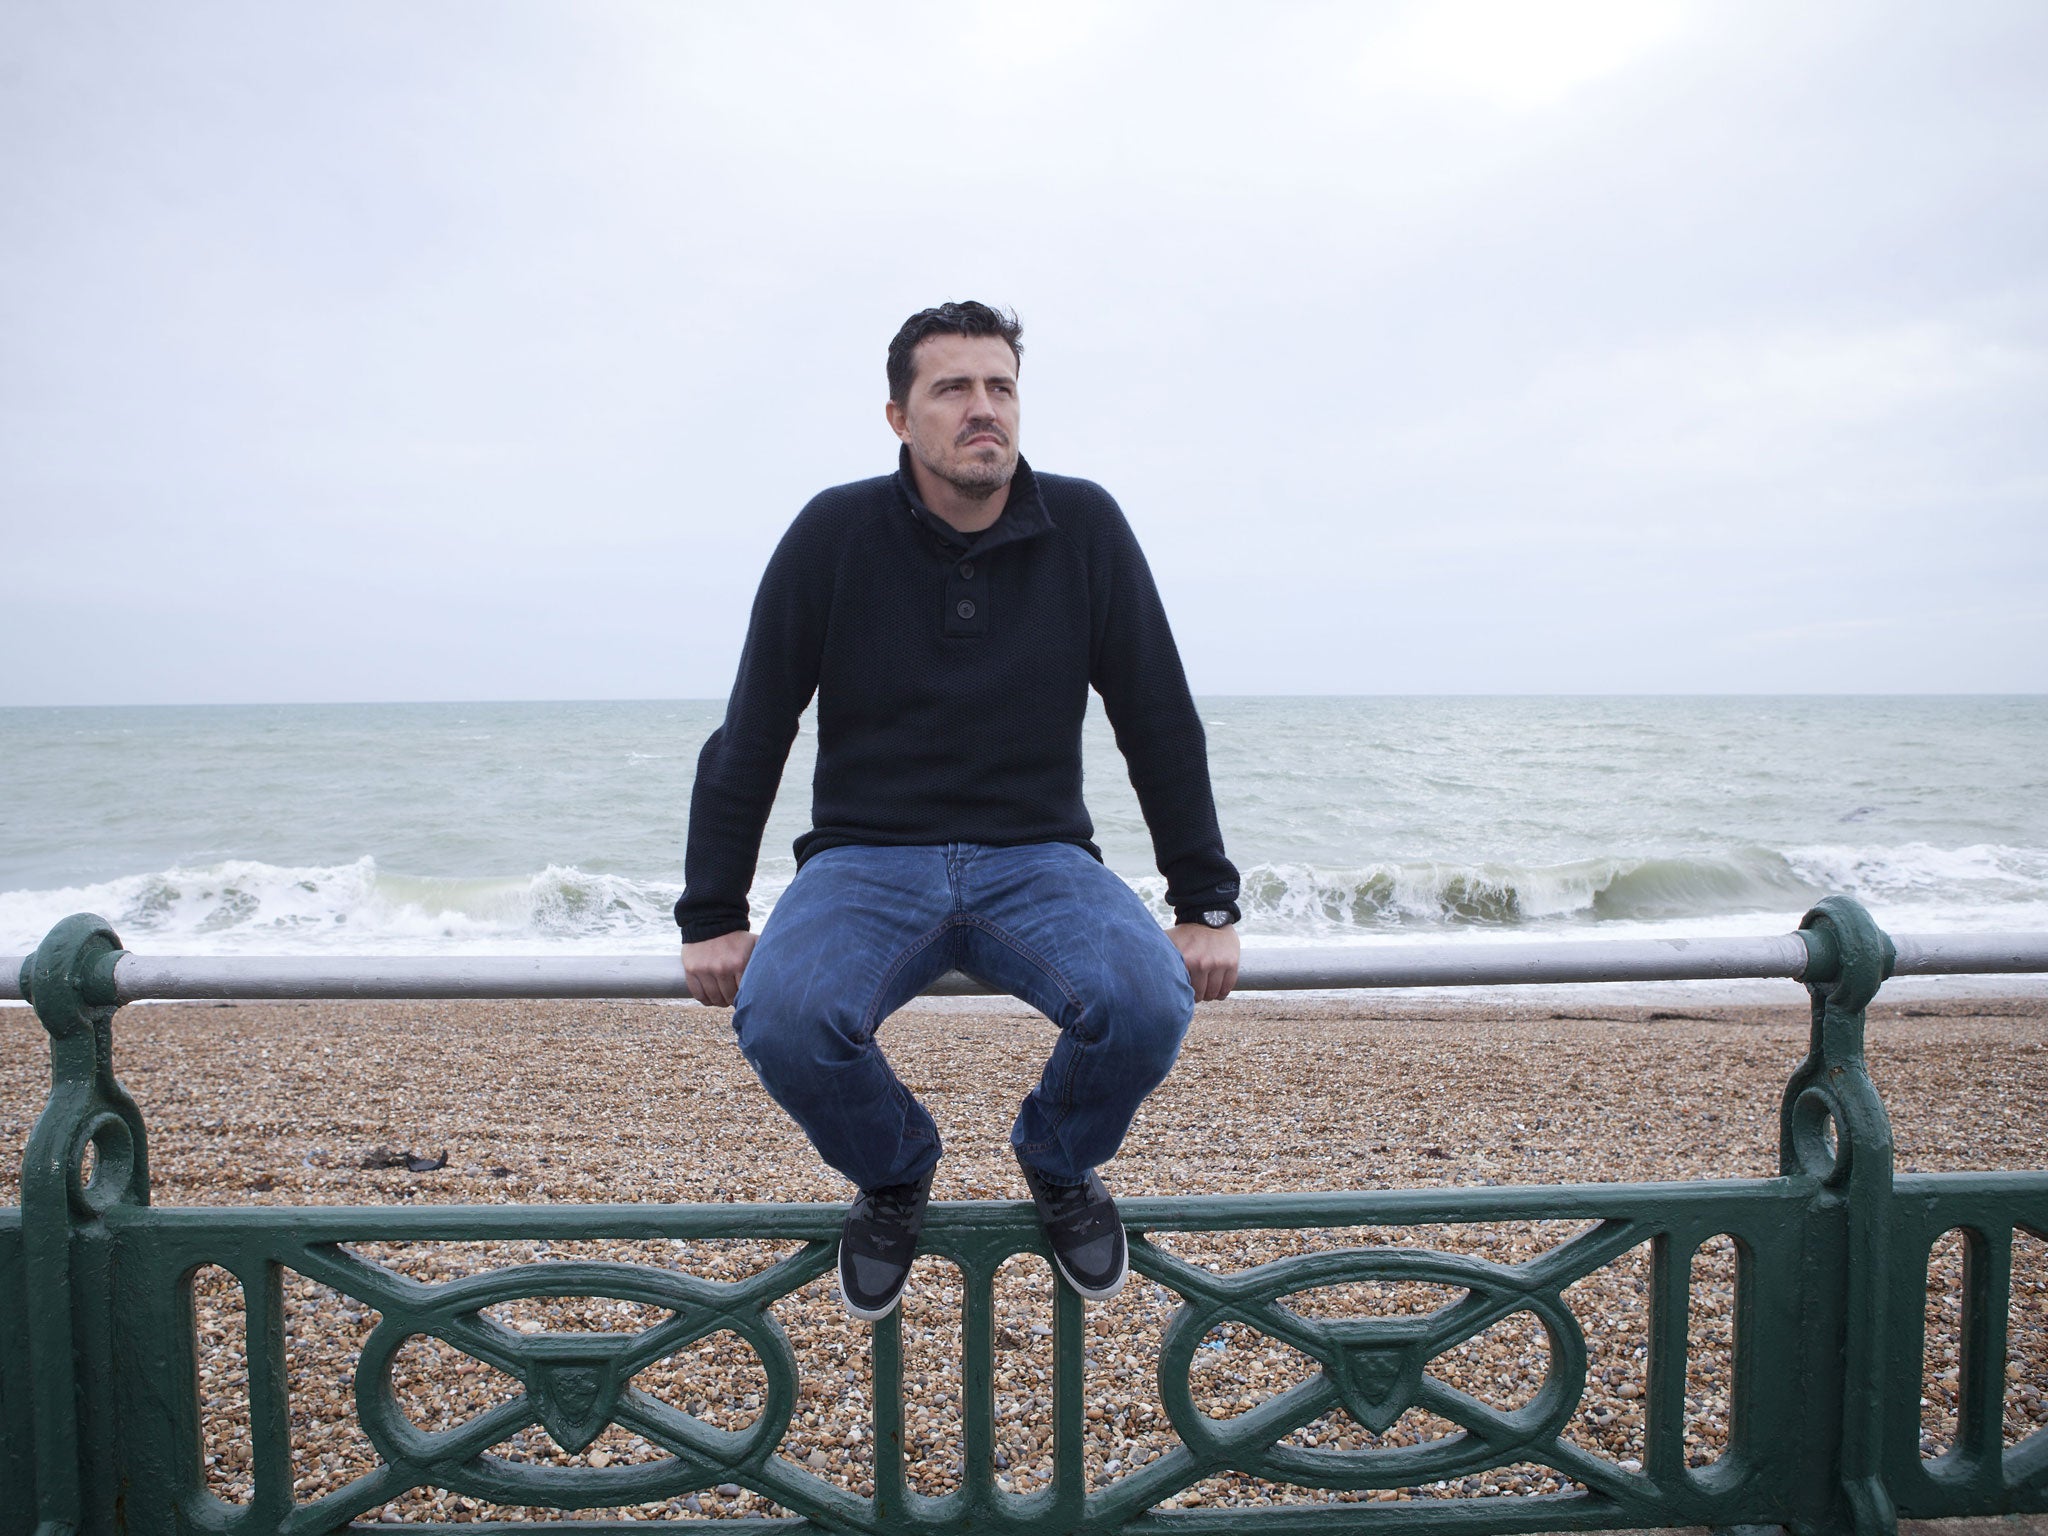 Oscar Garcia, Manager of Championship side Brighton & Hove Albion pictured on the promenade in Hove